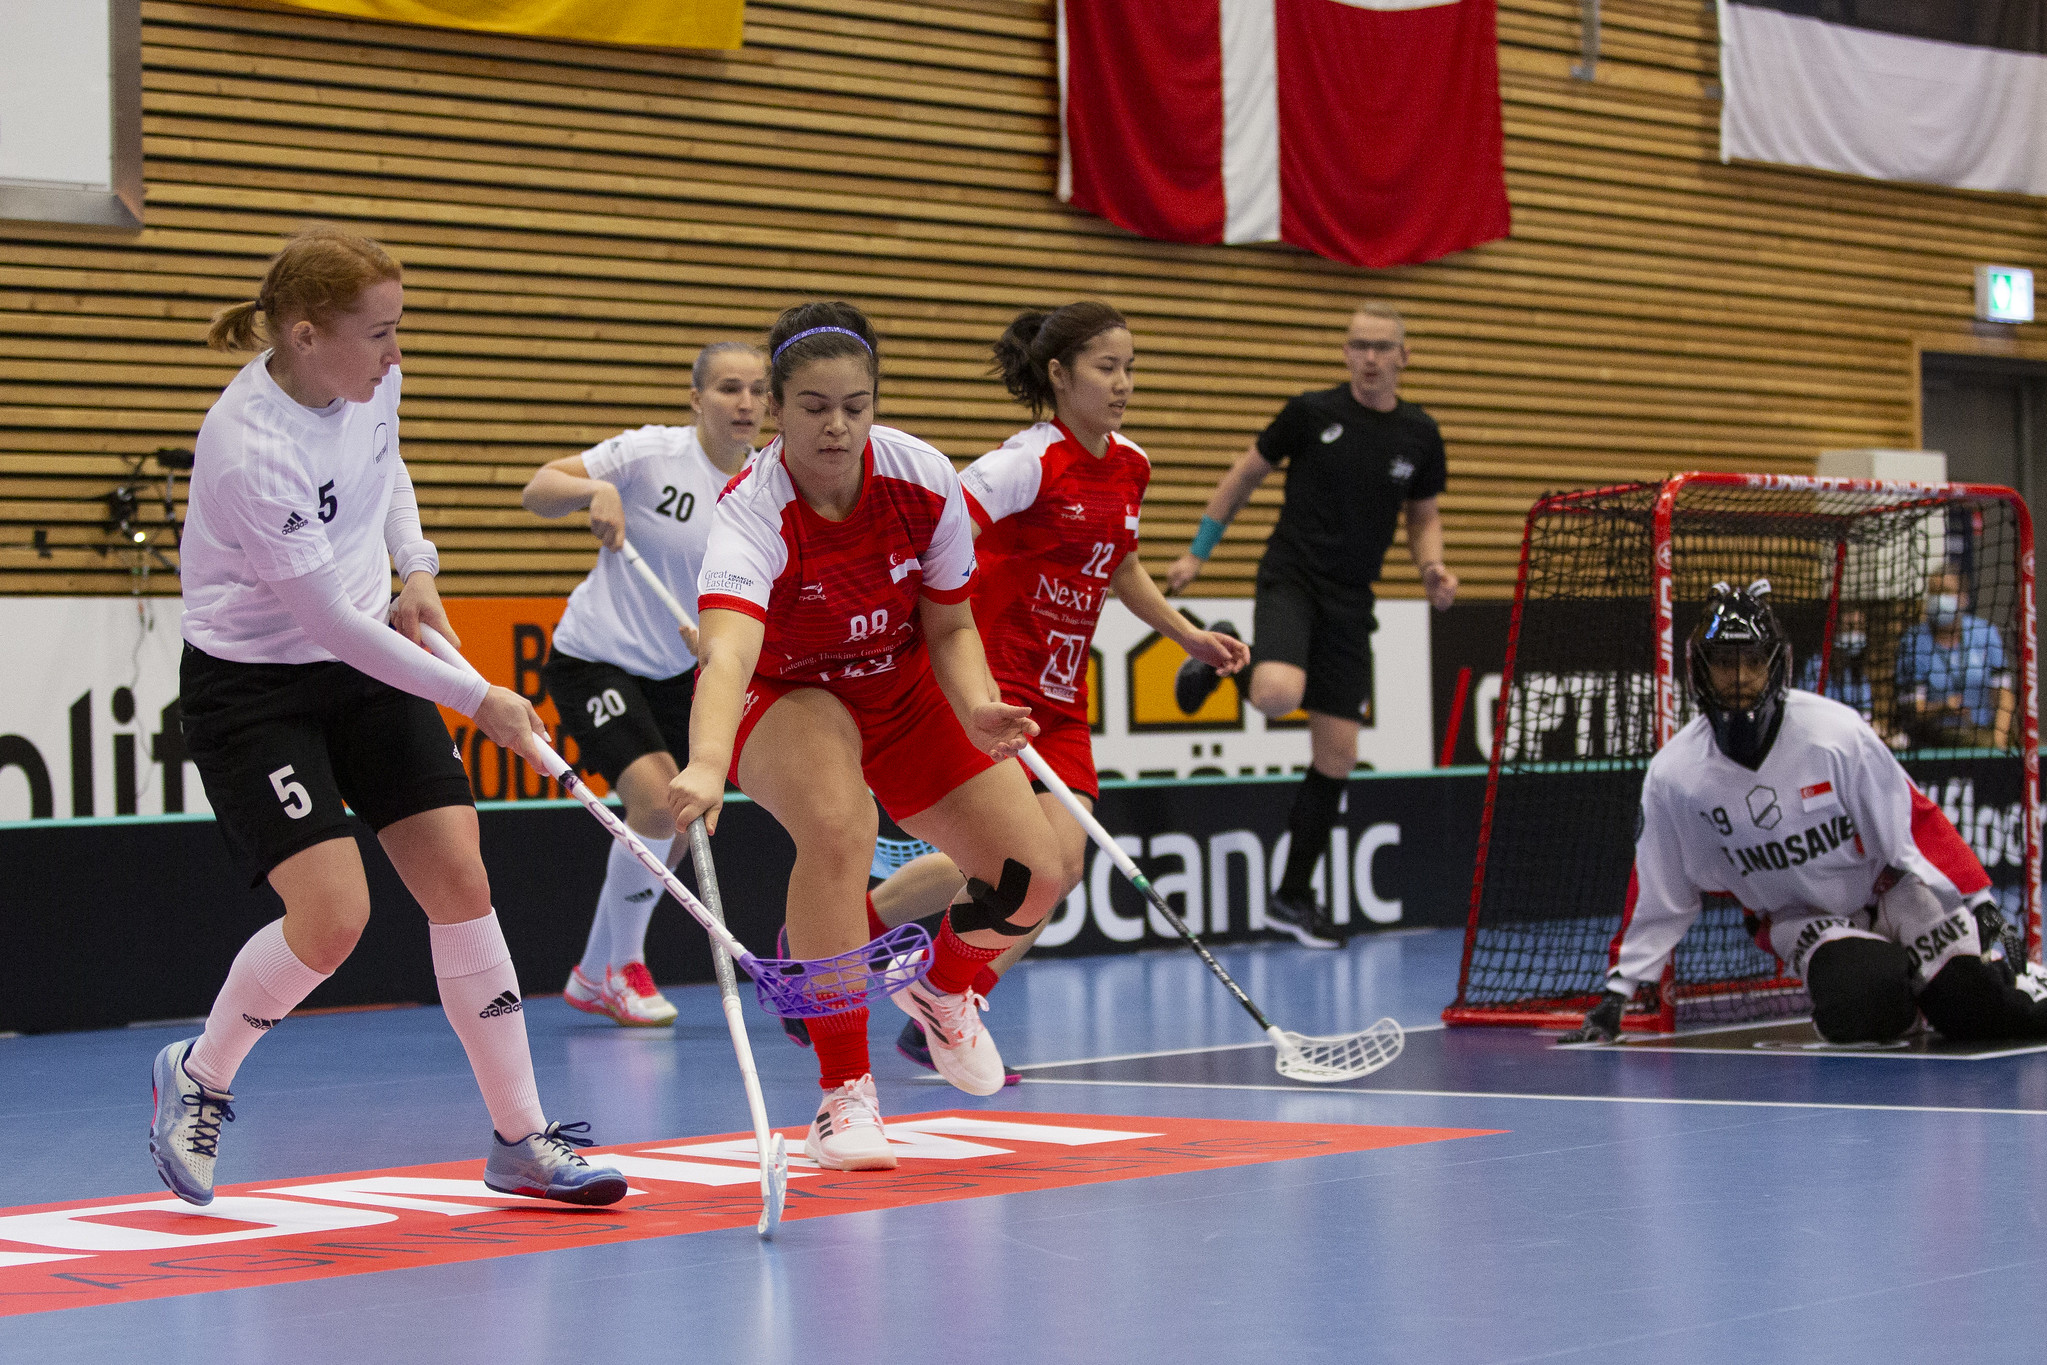 Estonia defeat Team Singapore 4-3, in a pulsating opening match of the 2021 IFF Women's World Floorball Championships!